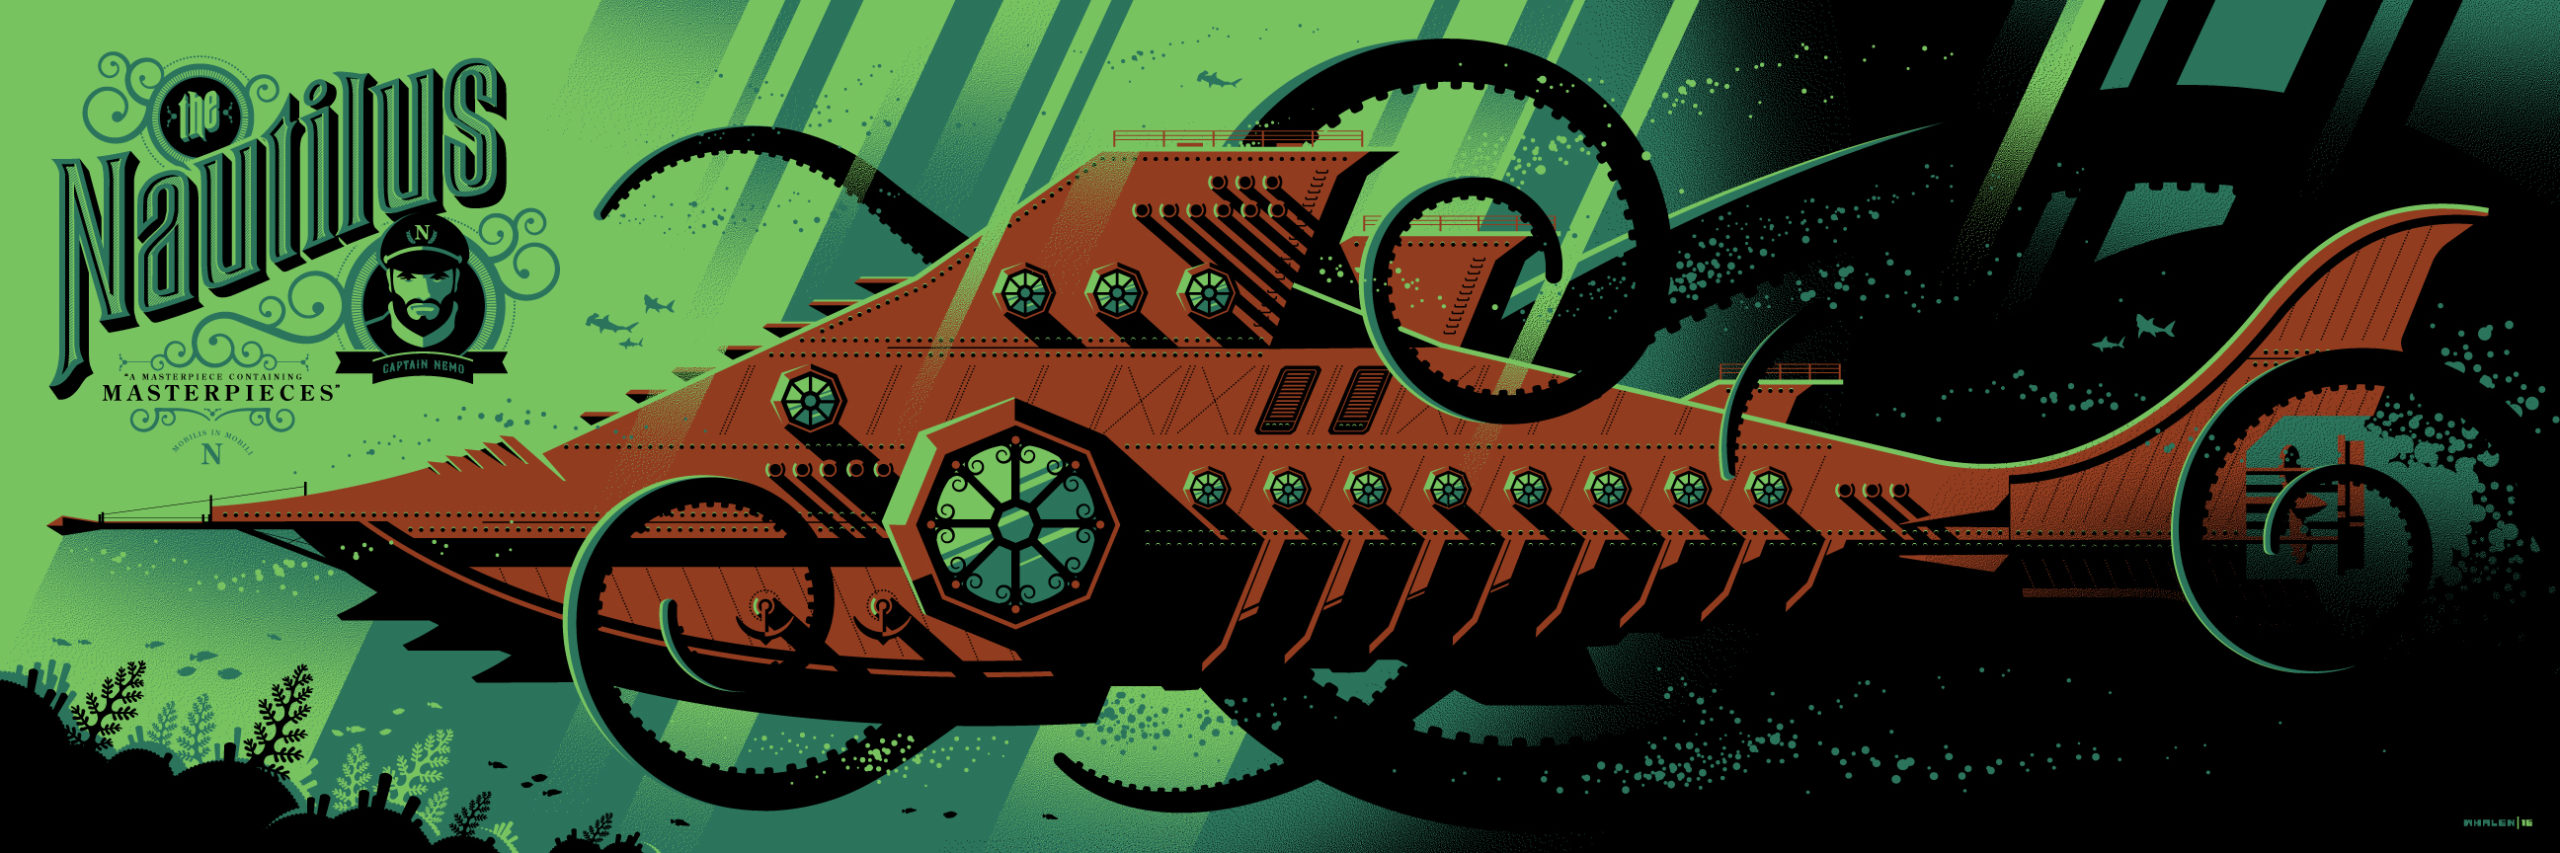 This Fun Science Fiction Movie Art Puts The Emphasis On The Science